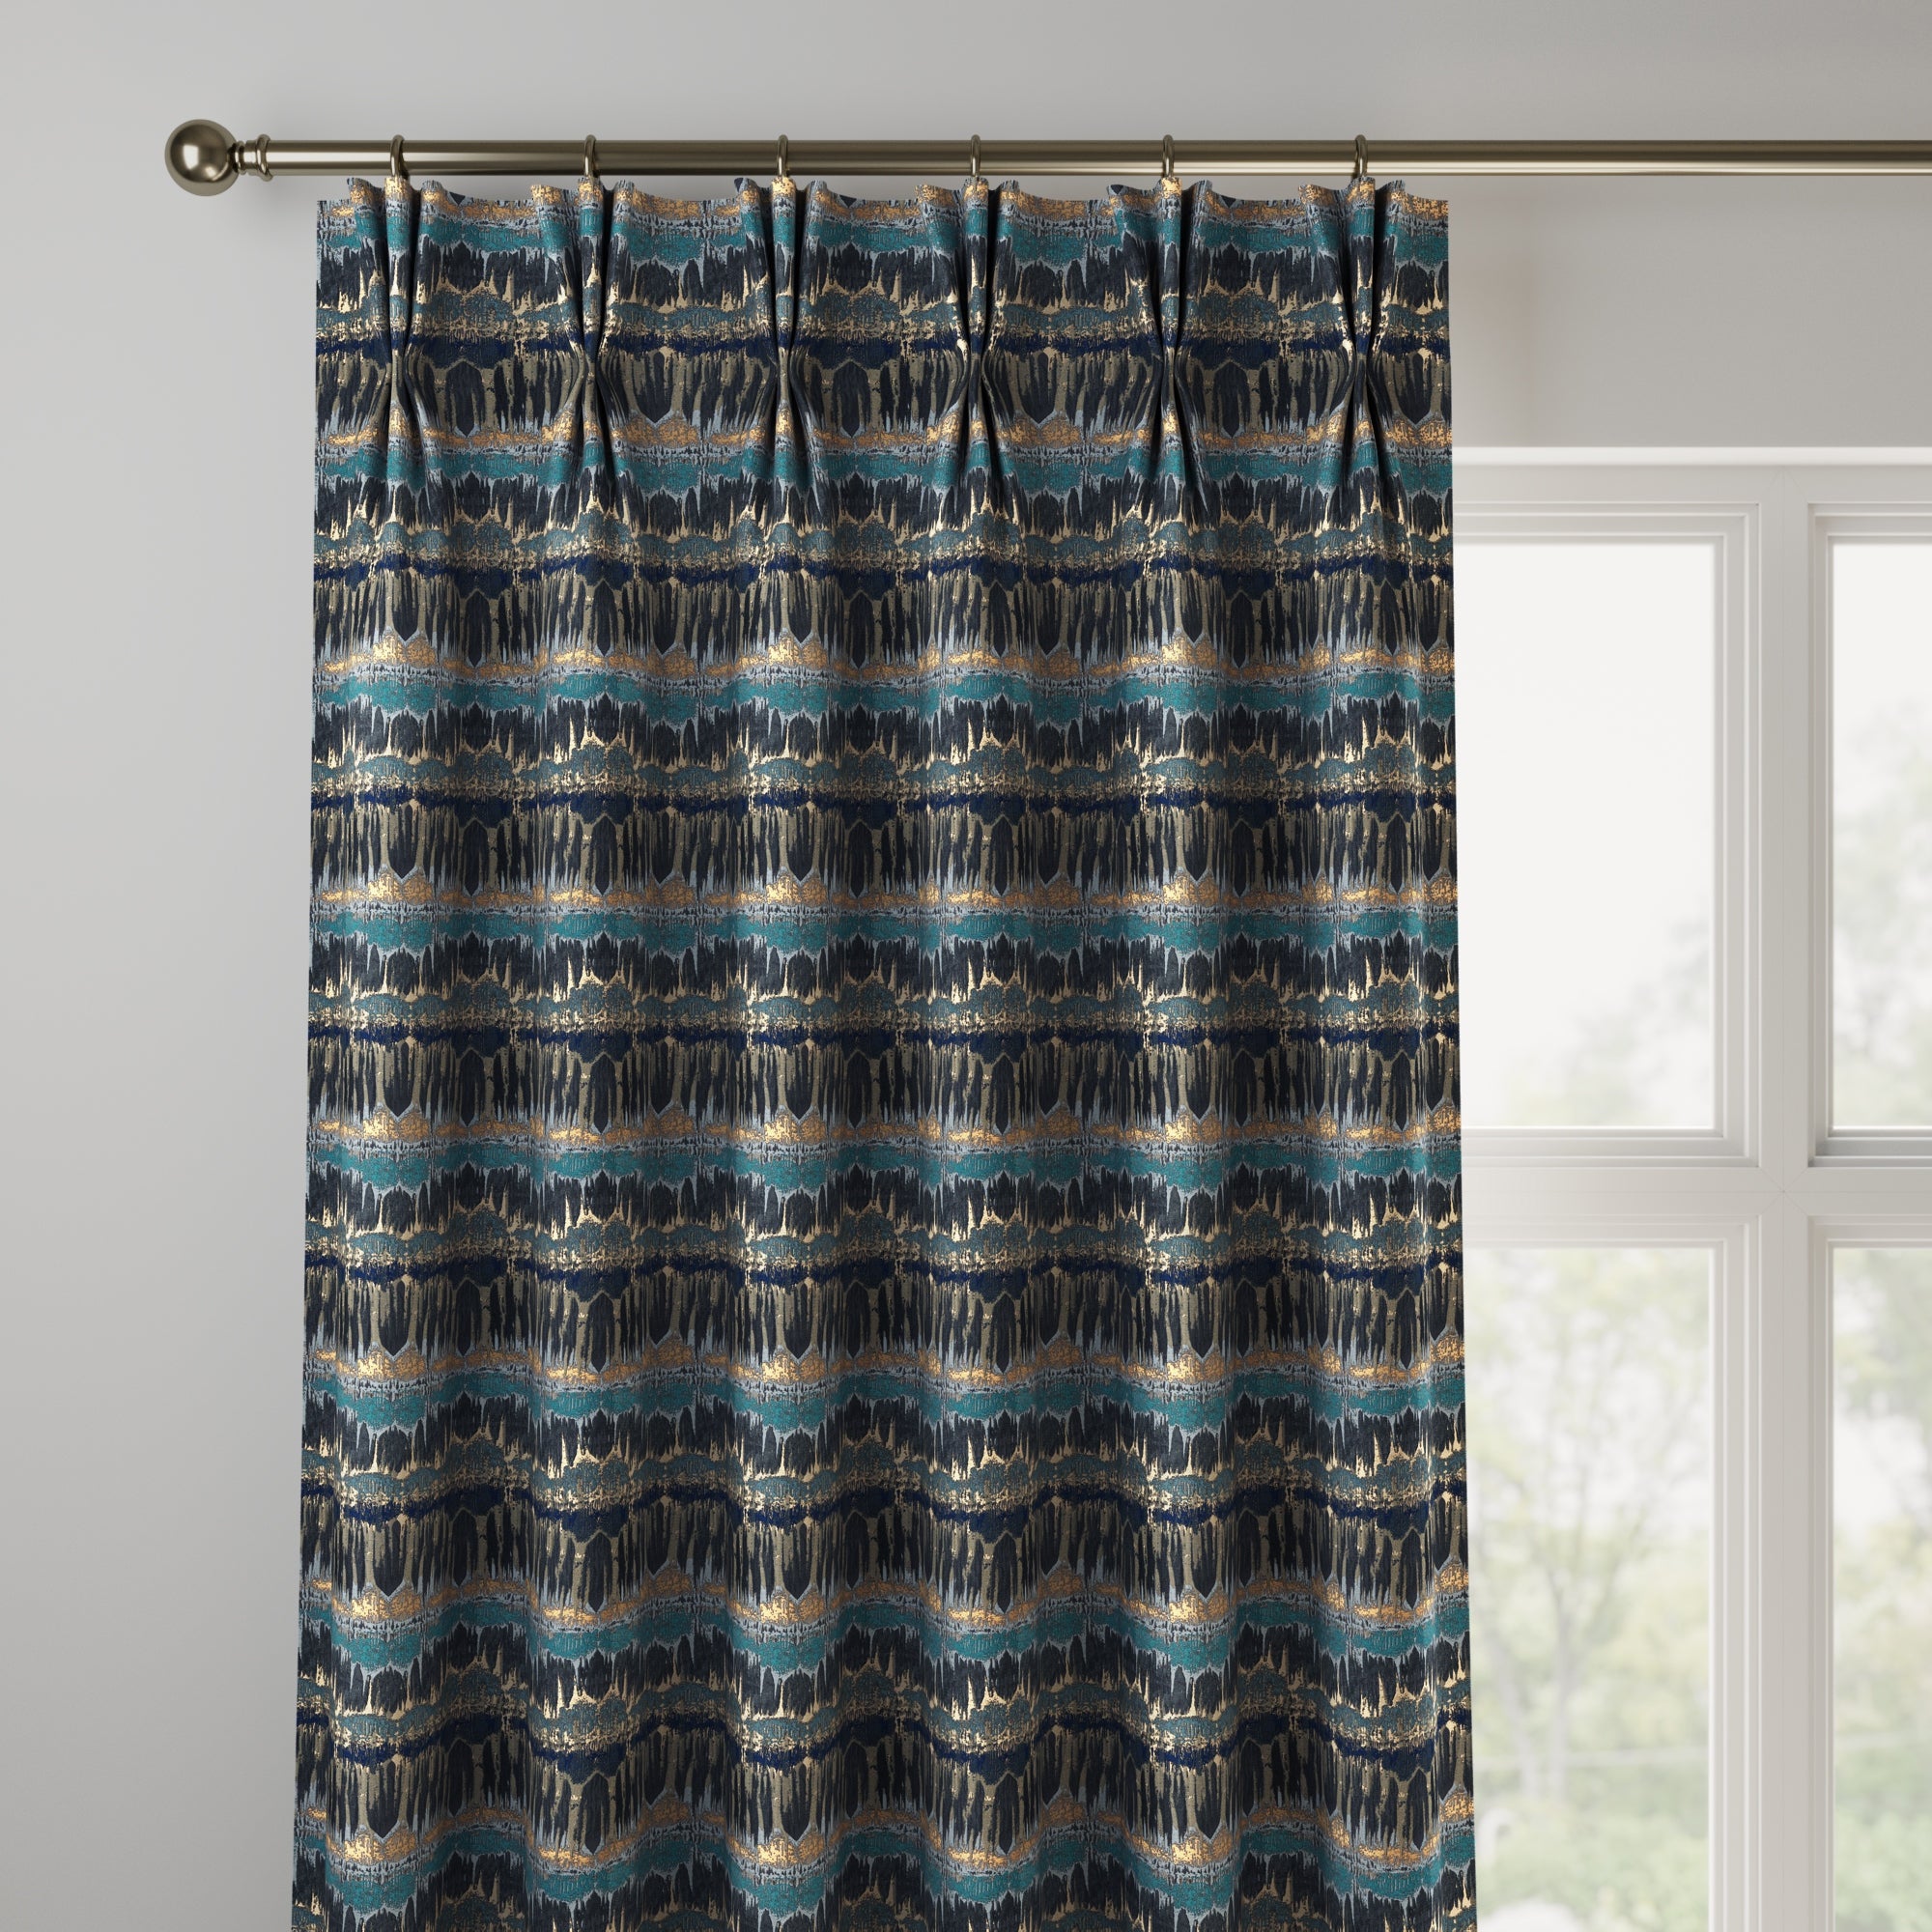 Budapest Made to Measure Curtains Budapest Teal